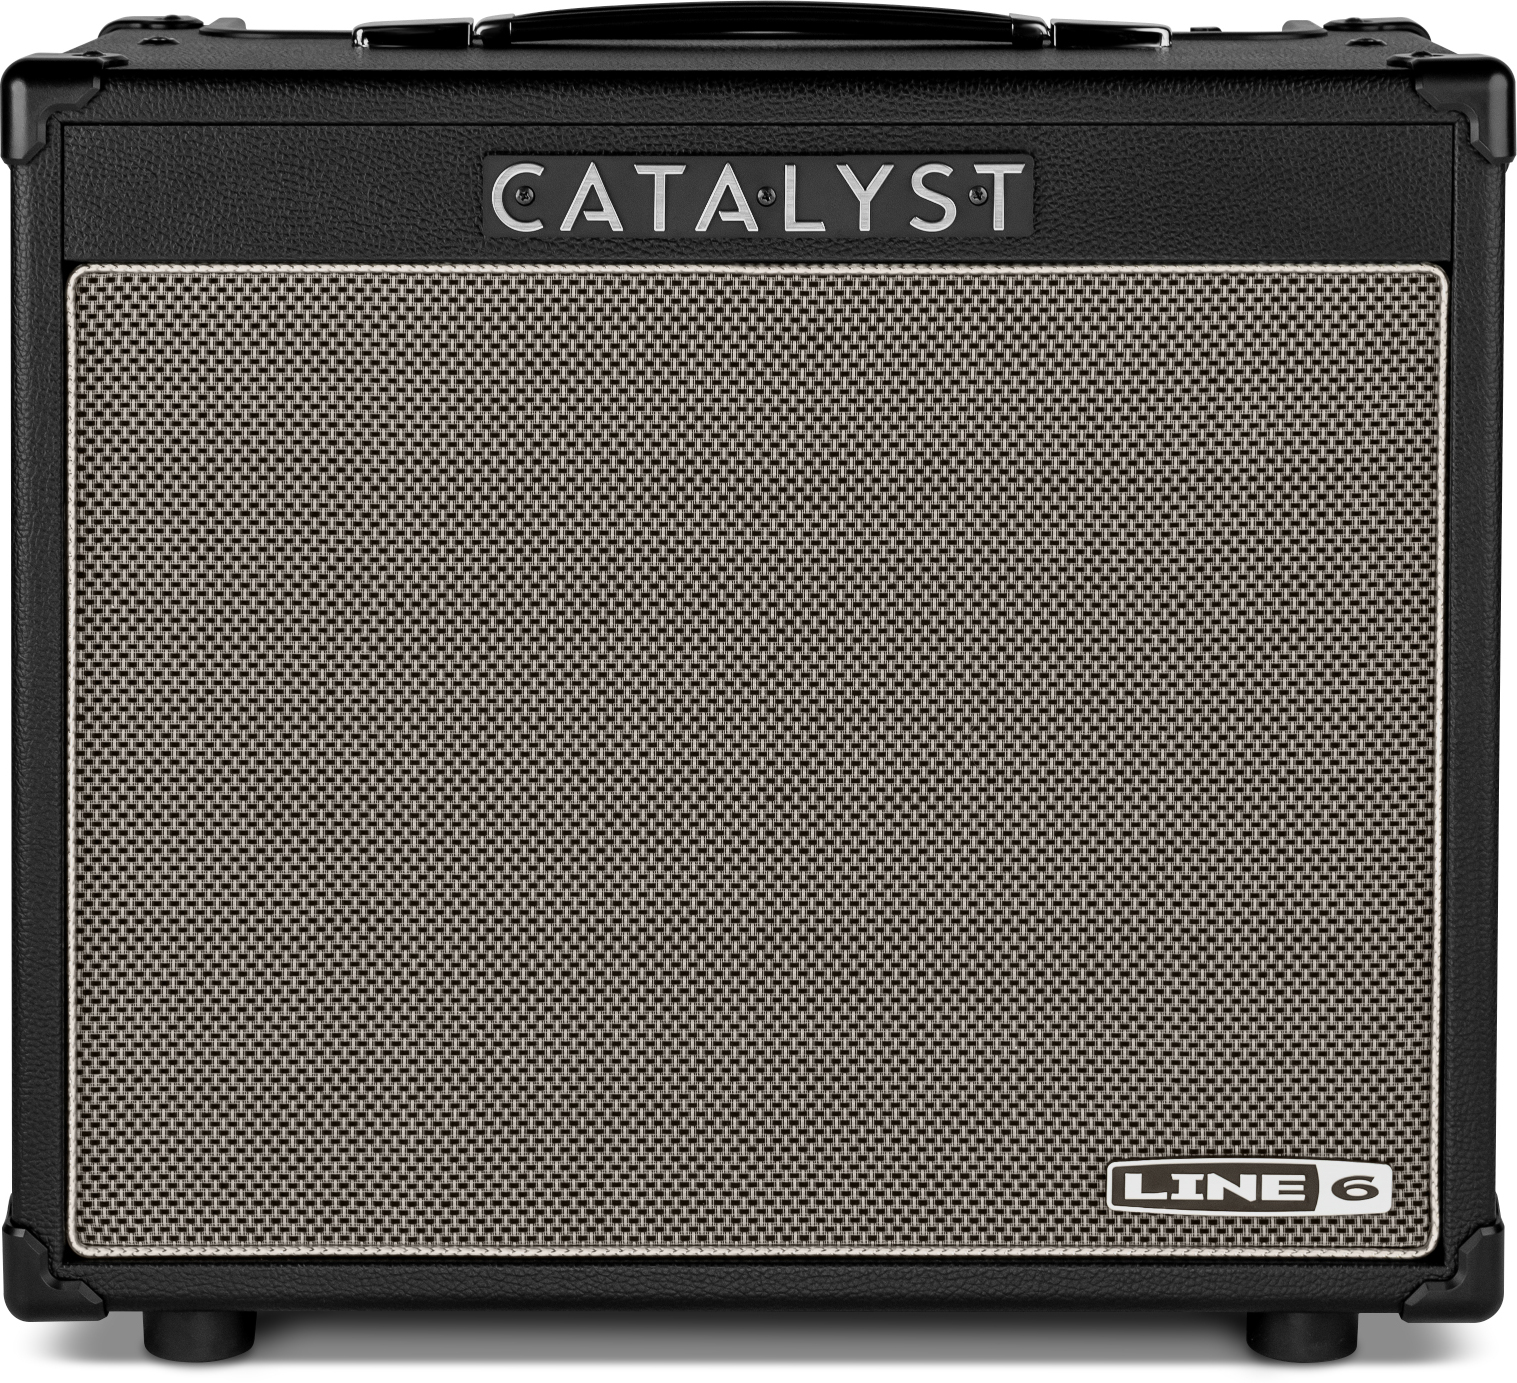 Line 6 Catalyst Cx Combo 60w 1x12 - Electric guitar combo amp - Main picture